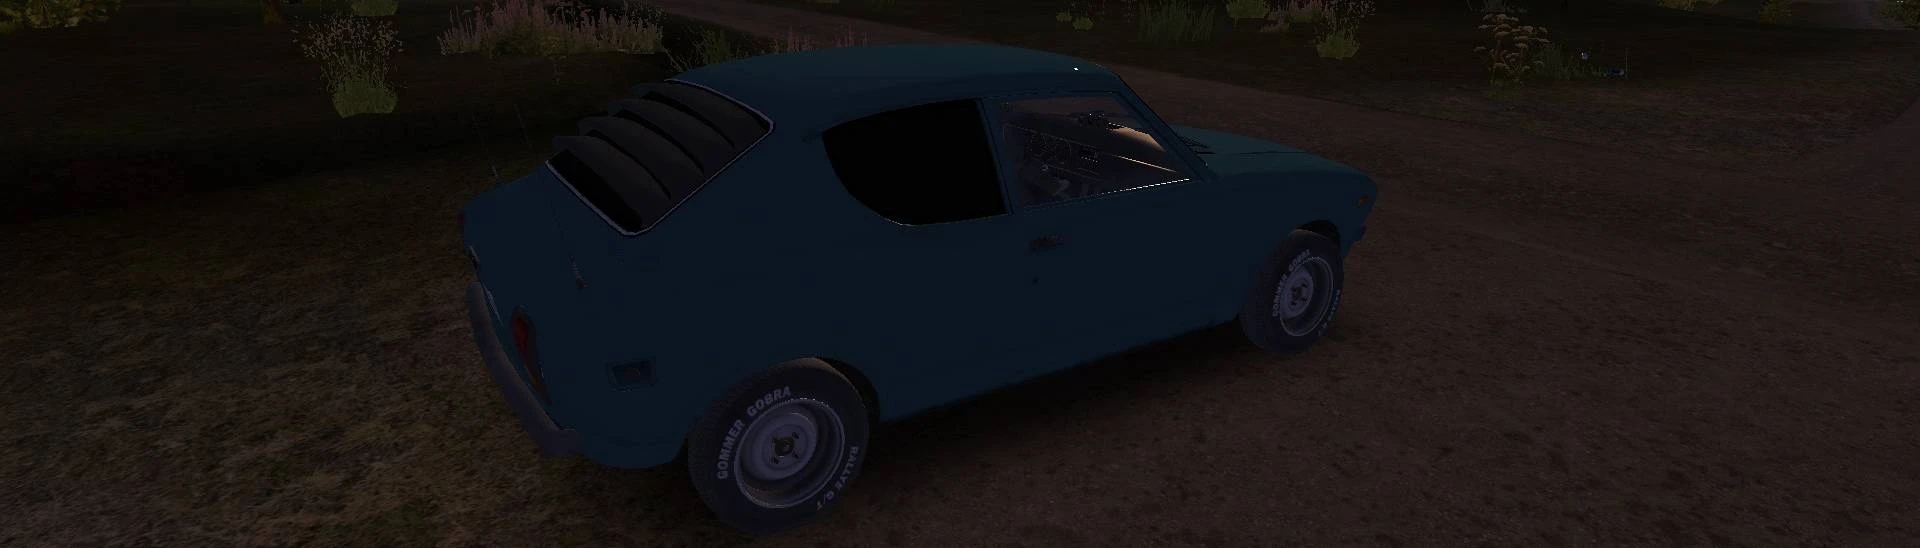 My Summer Car - Drivable Ricochet - new vehicle in the game